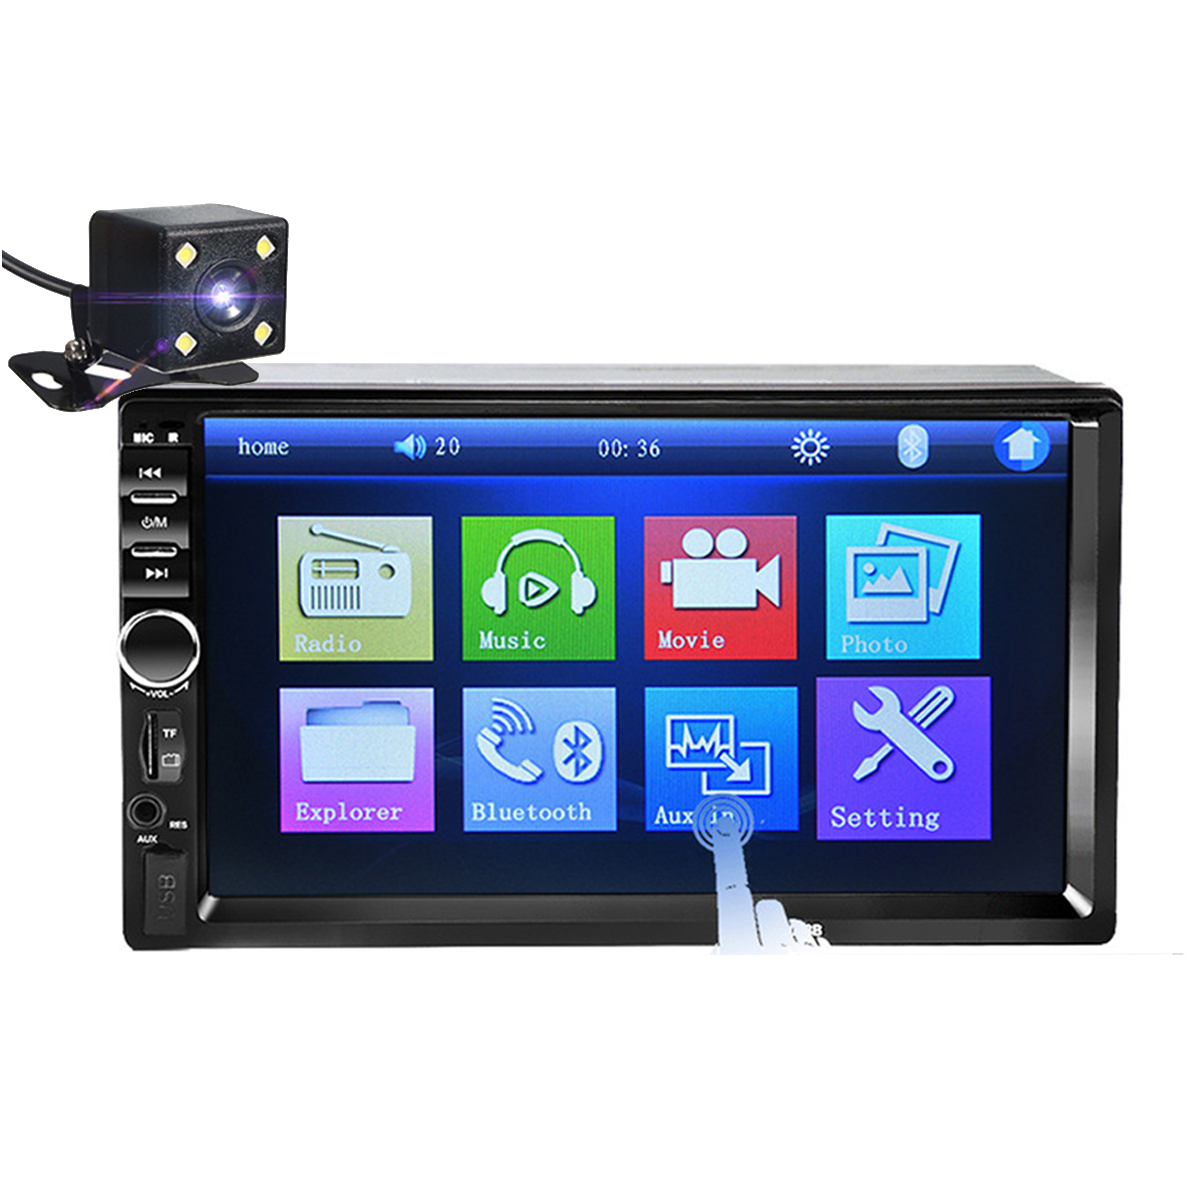 

7018B 7Inch 2Din Car MP5 Player HD Touch Screen Stereo Radio MP3 FM USB bluetooth with Backup Camera